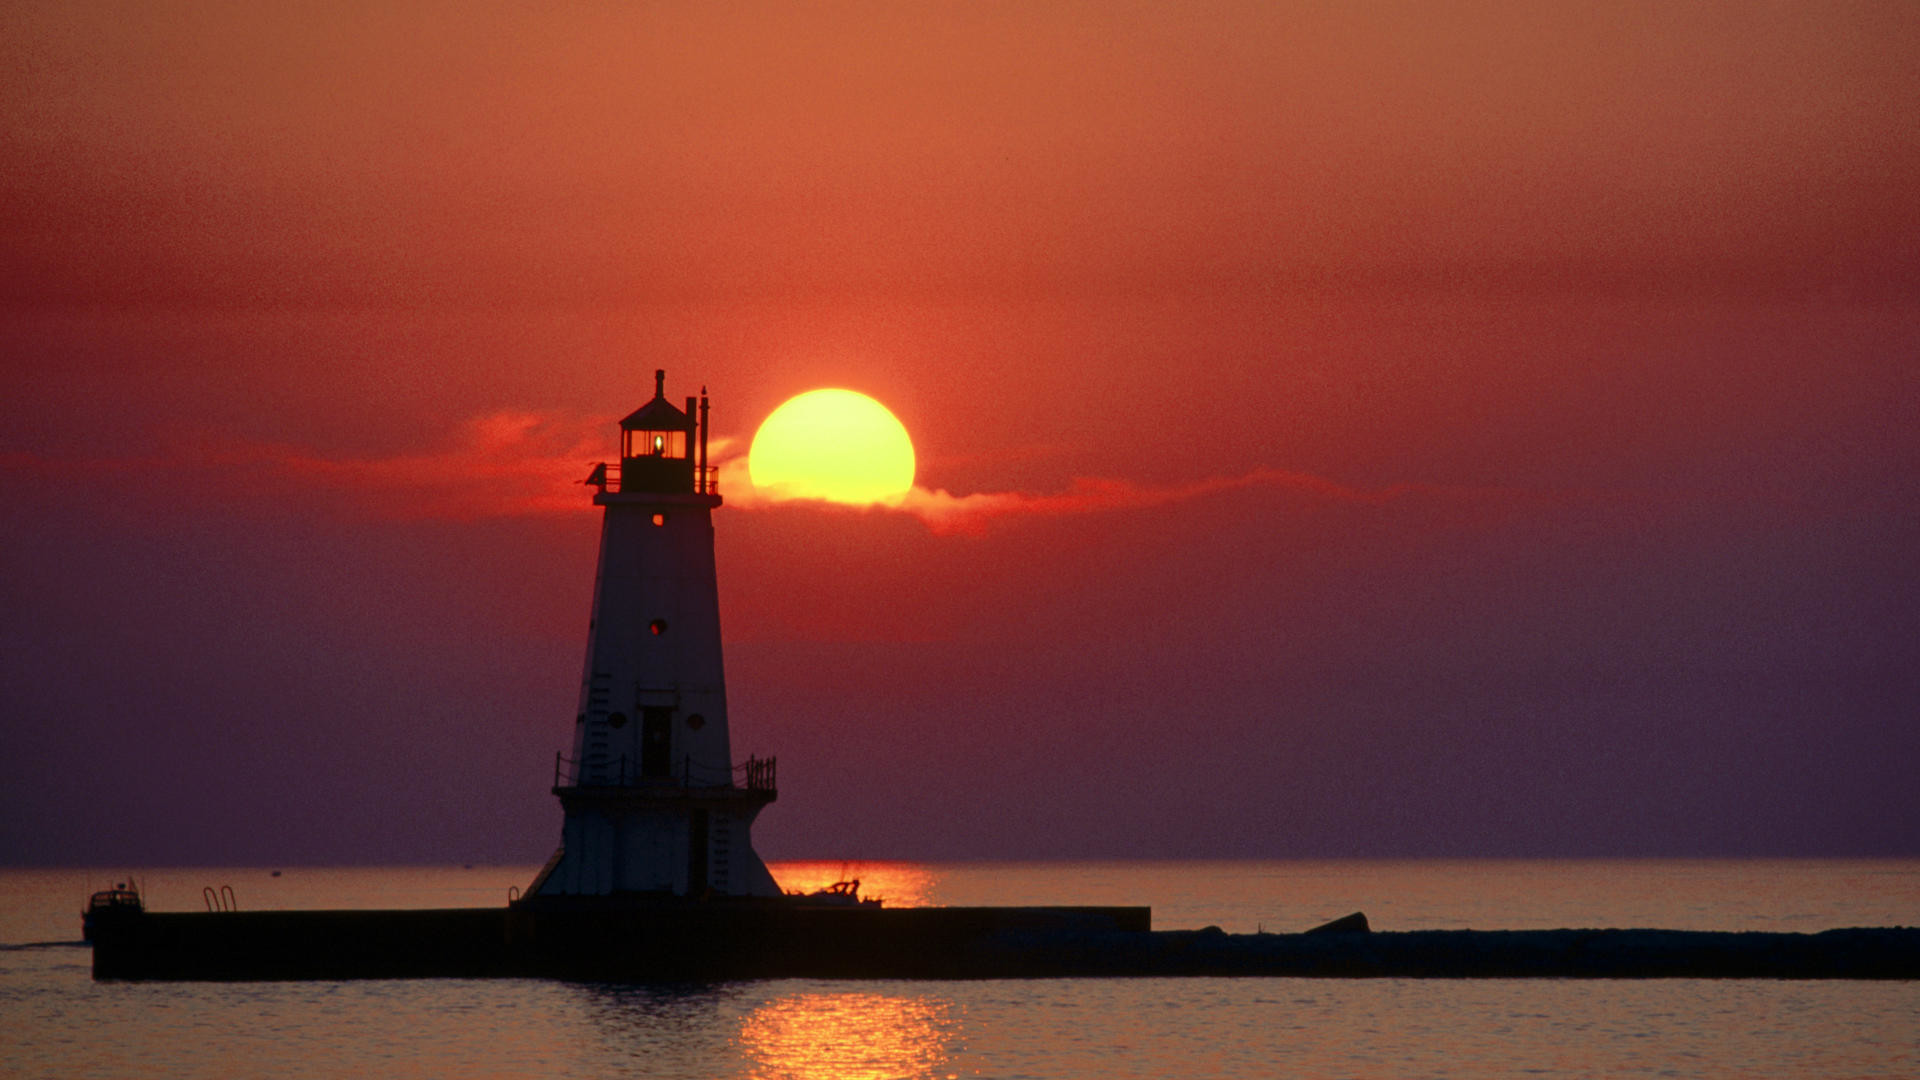 1920x1080 Download Background - Sunset on the Lighthouse - Free Cool Backgrounds and  Wallpapers for your Desktop Or Laptop.